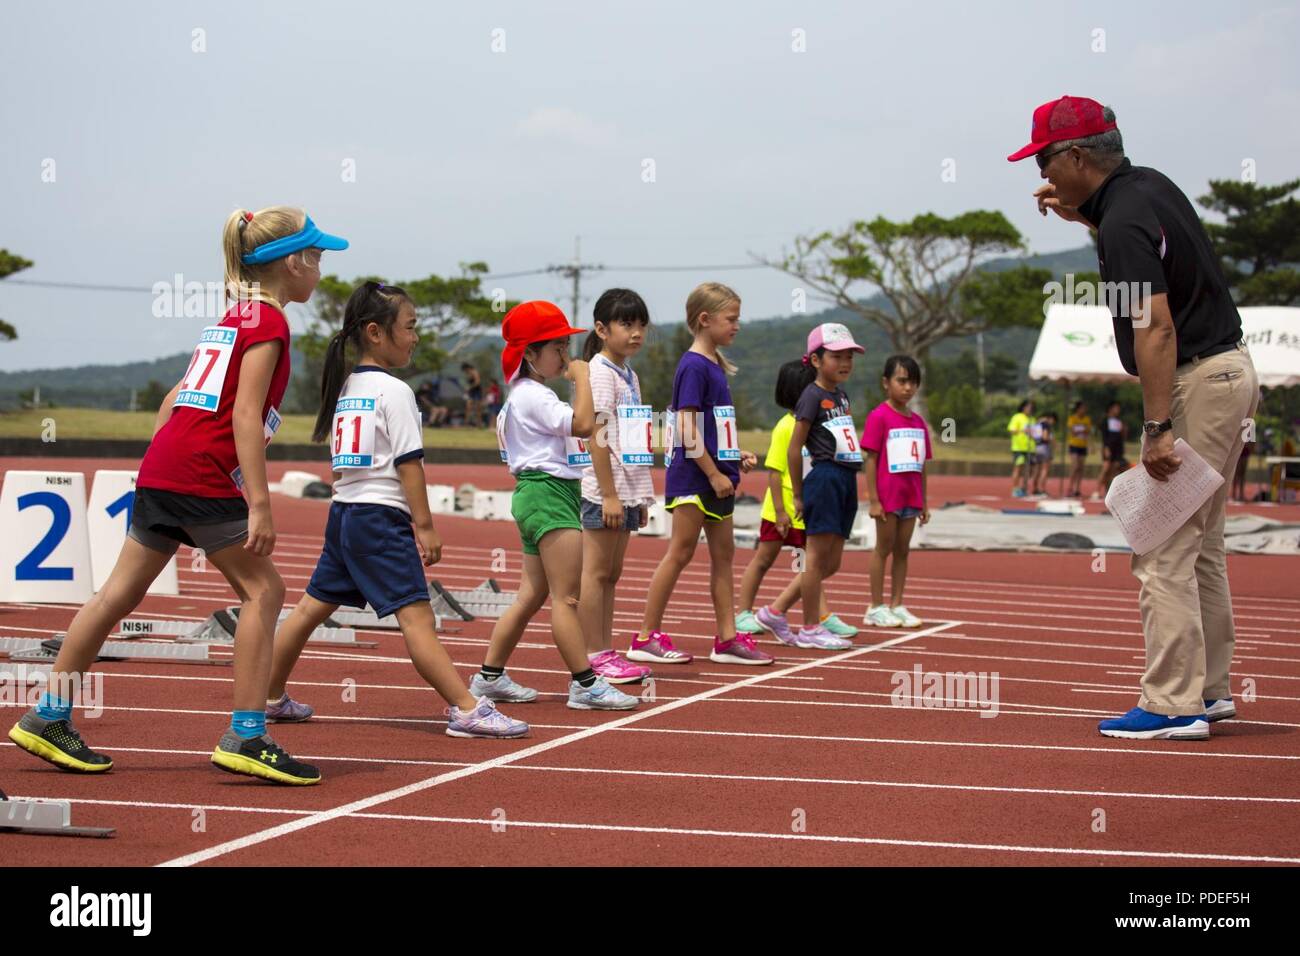 ONNA VILLAGE, OKINAWA, Japan – Children line up to start the 100-meter dash May 19 at the Akama Sports Complex in Onna Village, Okinawa, Japan. The track meet consisted of the 100-m dash, a 100-m relay, long jump, and a vortex football throw. To keep the competition fair, the children were split into grade levels and competed among themselves. Stock Photo